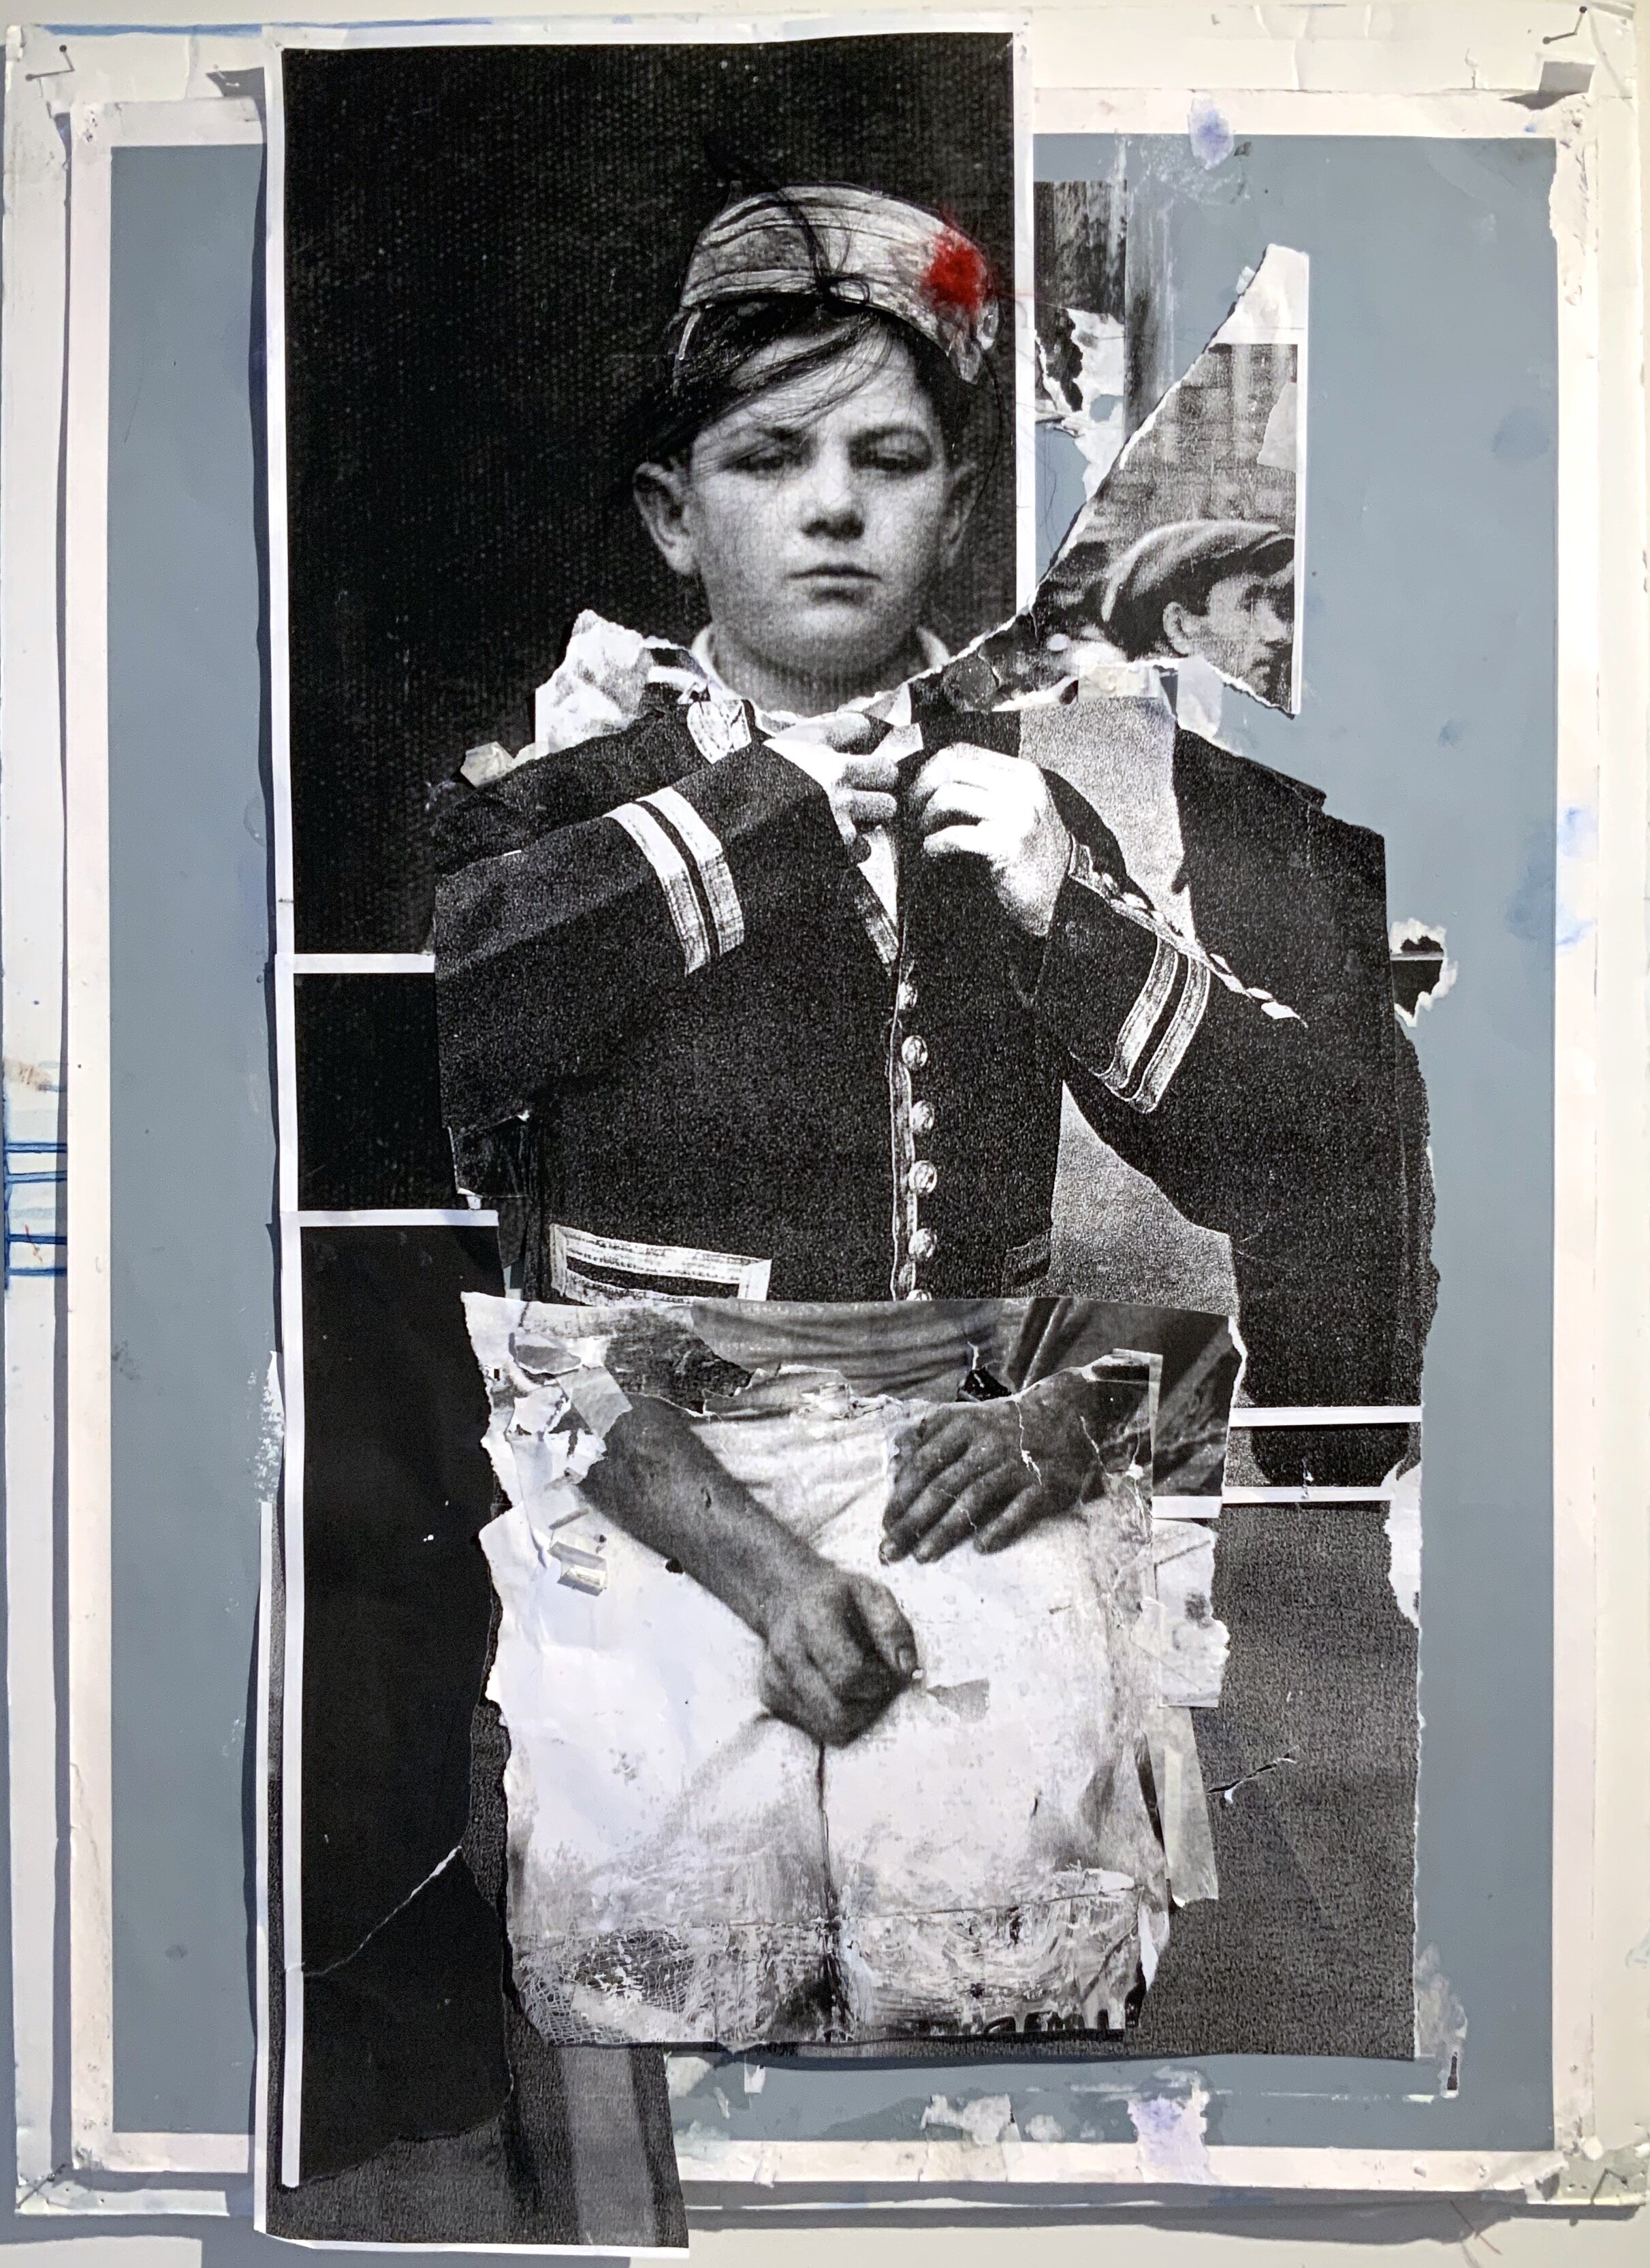 Angela Grossmann, Cadet, 2021, Mixed Media on Paper, 32 x 22 inches, $7,750